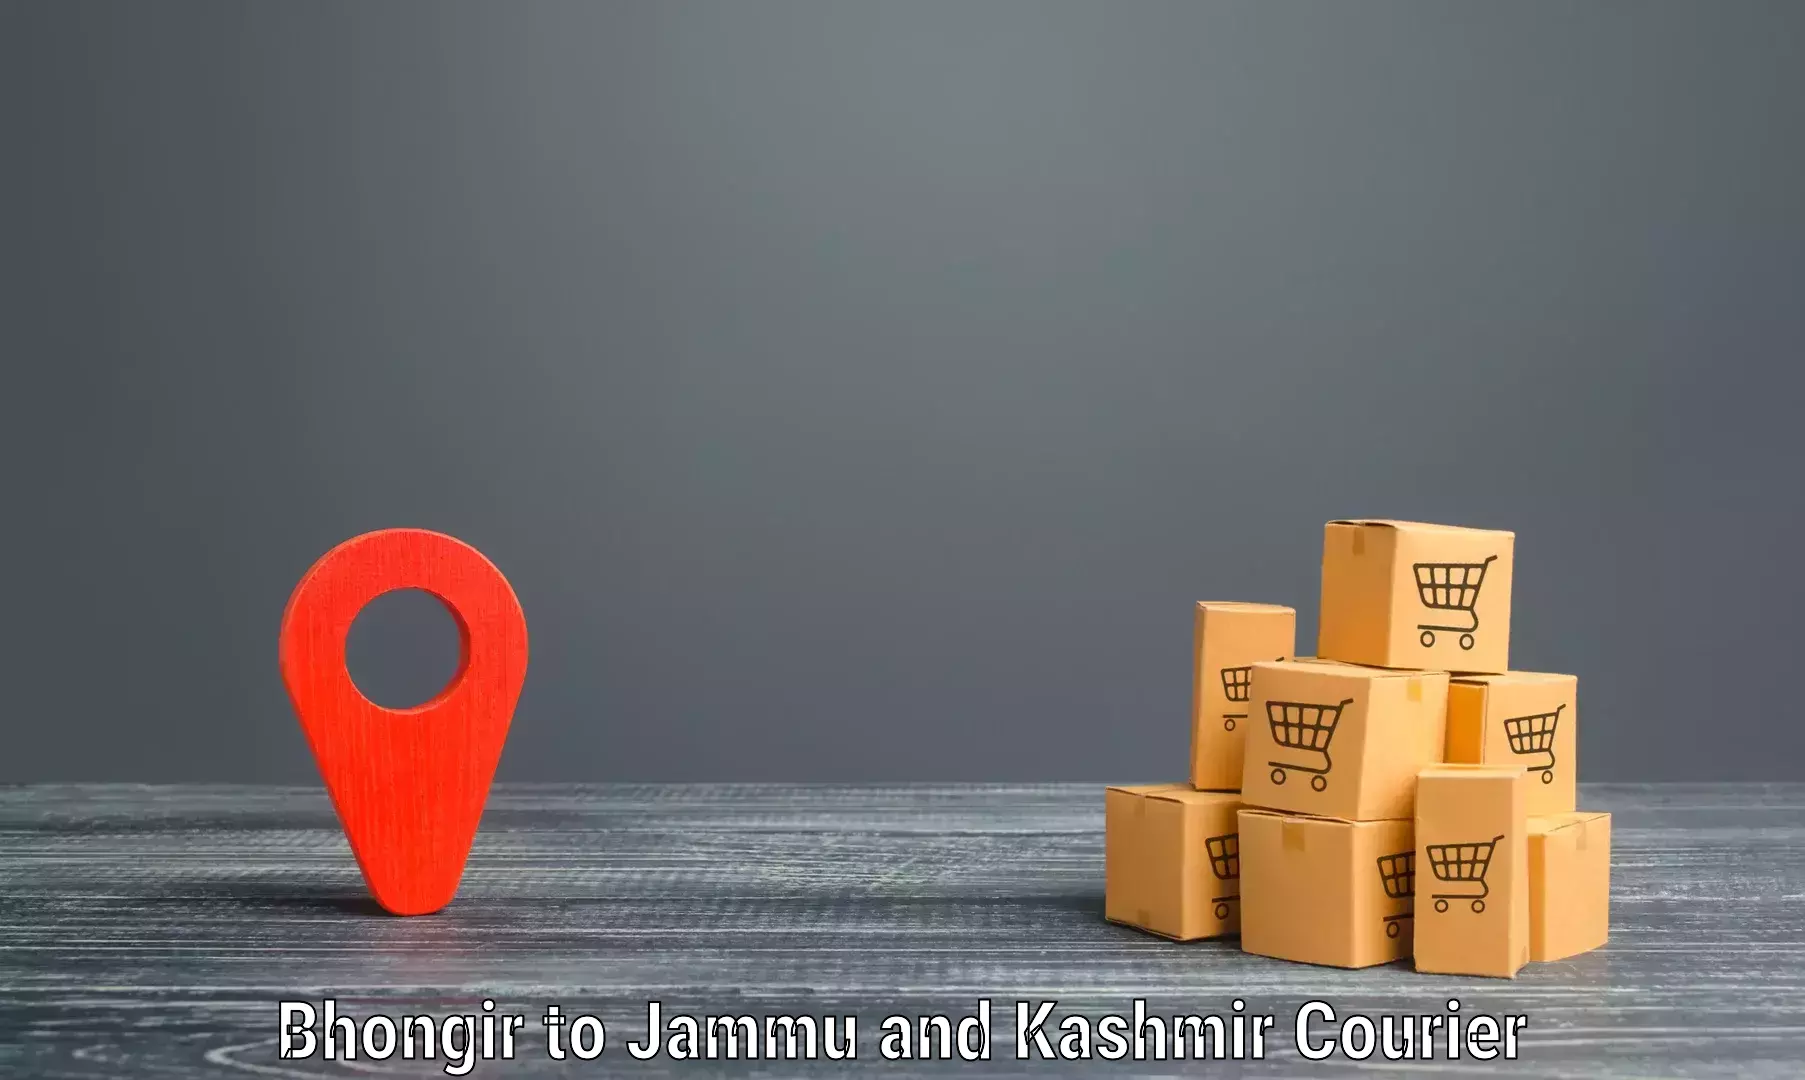 Automated shipping processes Bhongir to Jammu and Kashmir